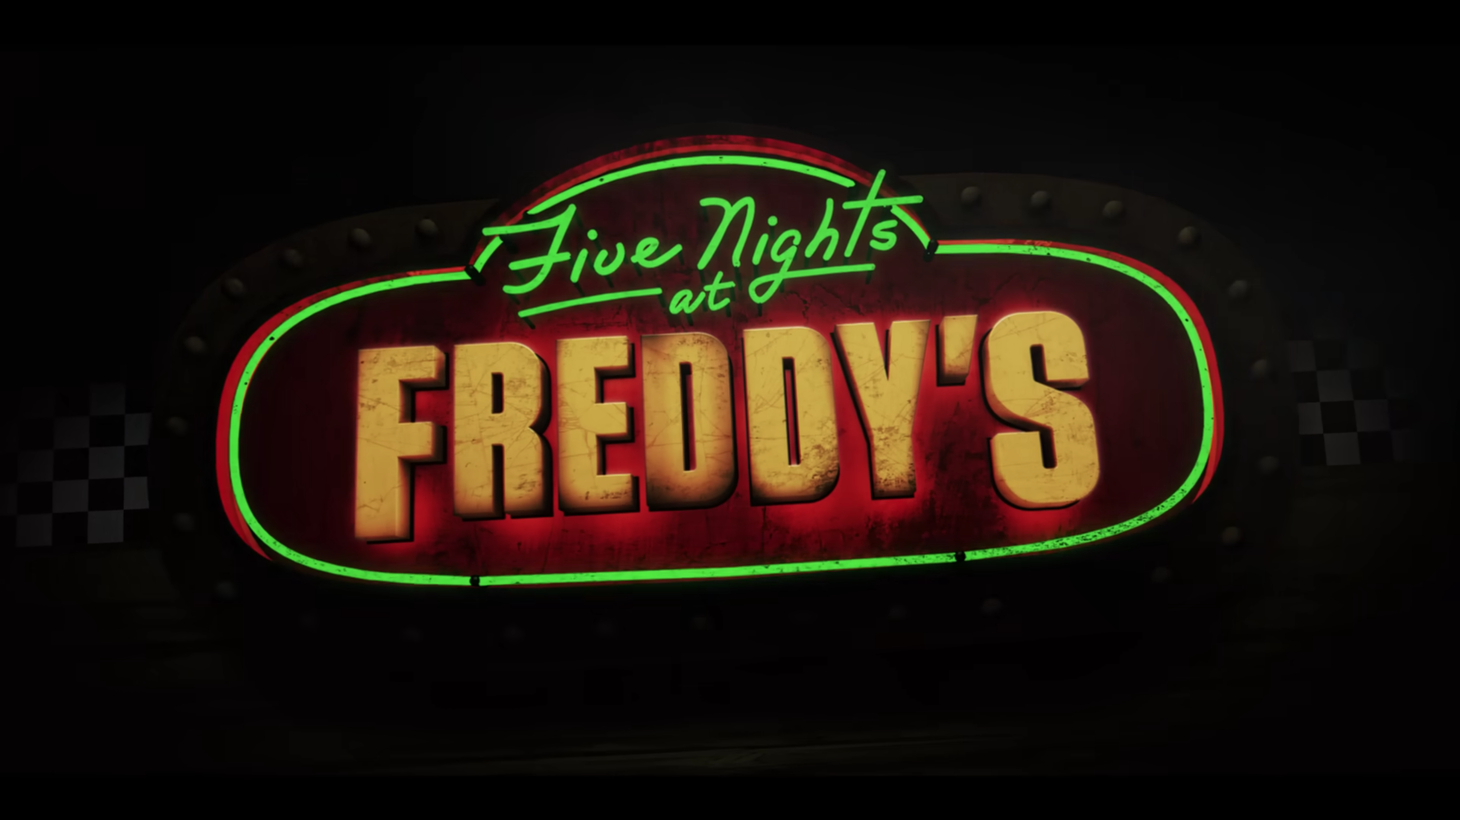 Meet the Monsters in Terrifying New Trailer For Five Nights at Freddy's